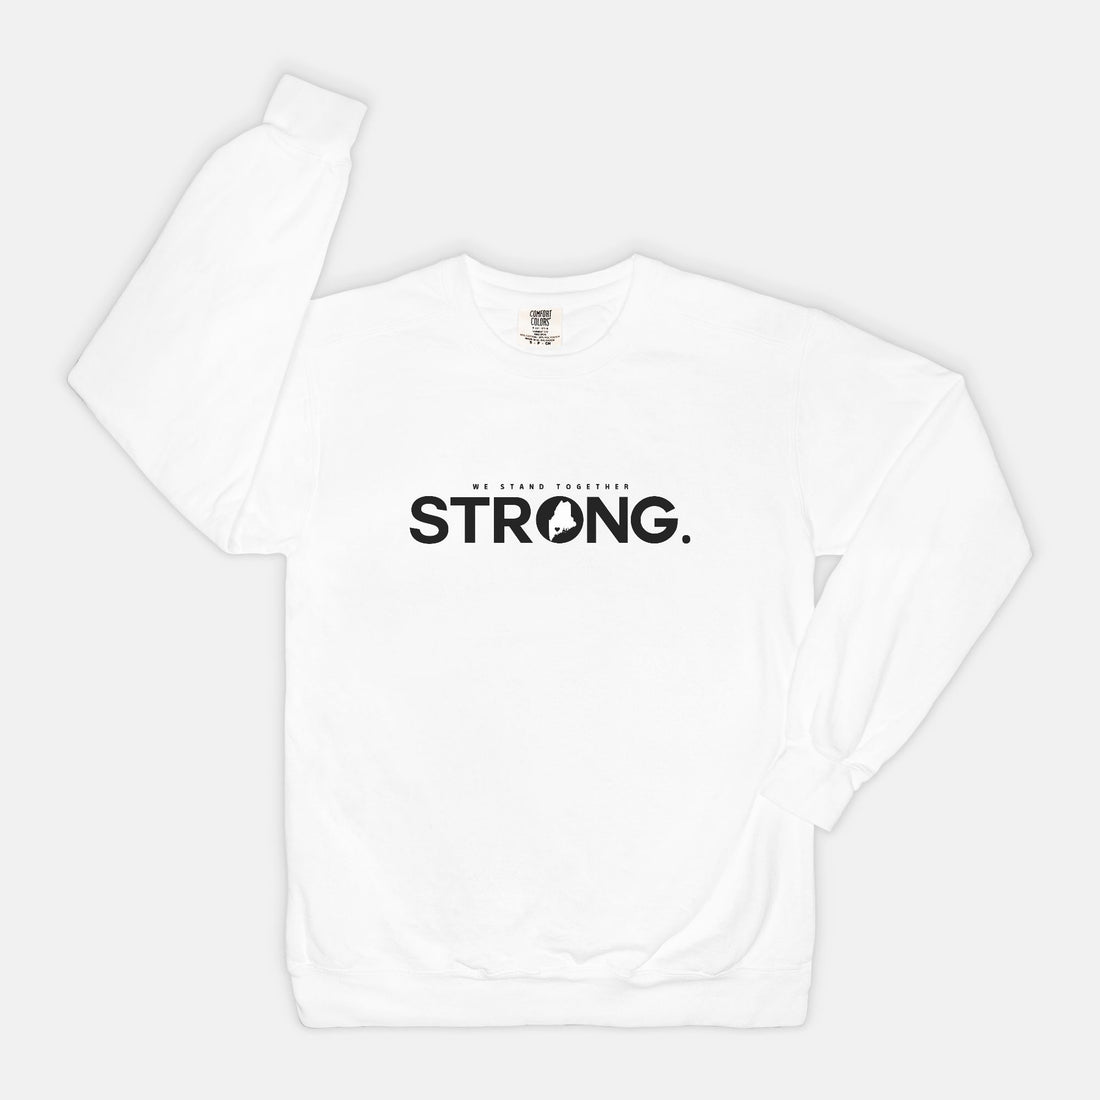 We Stand Together STRONG.  Maine Support Lewiston Crewneck Sweatshirt - ALL proceeds will go to victim funds